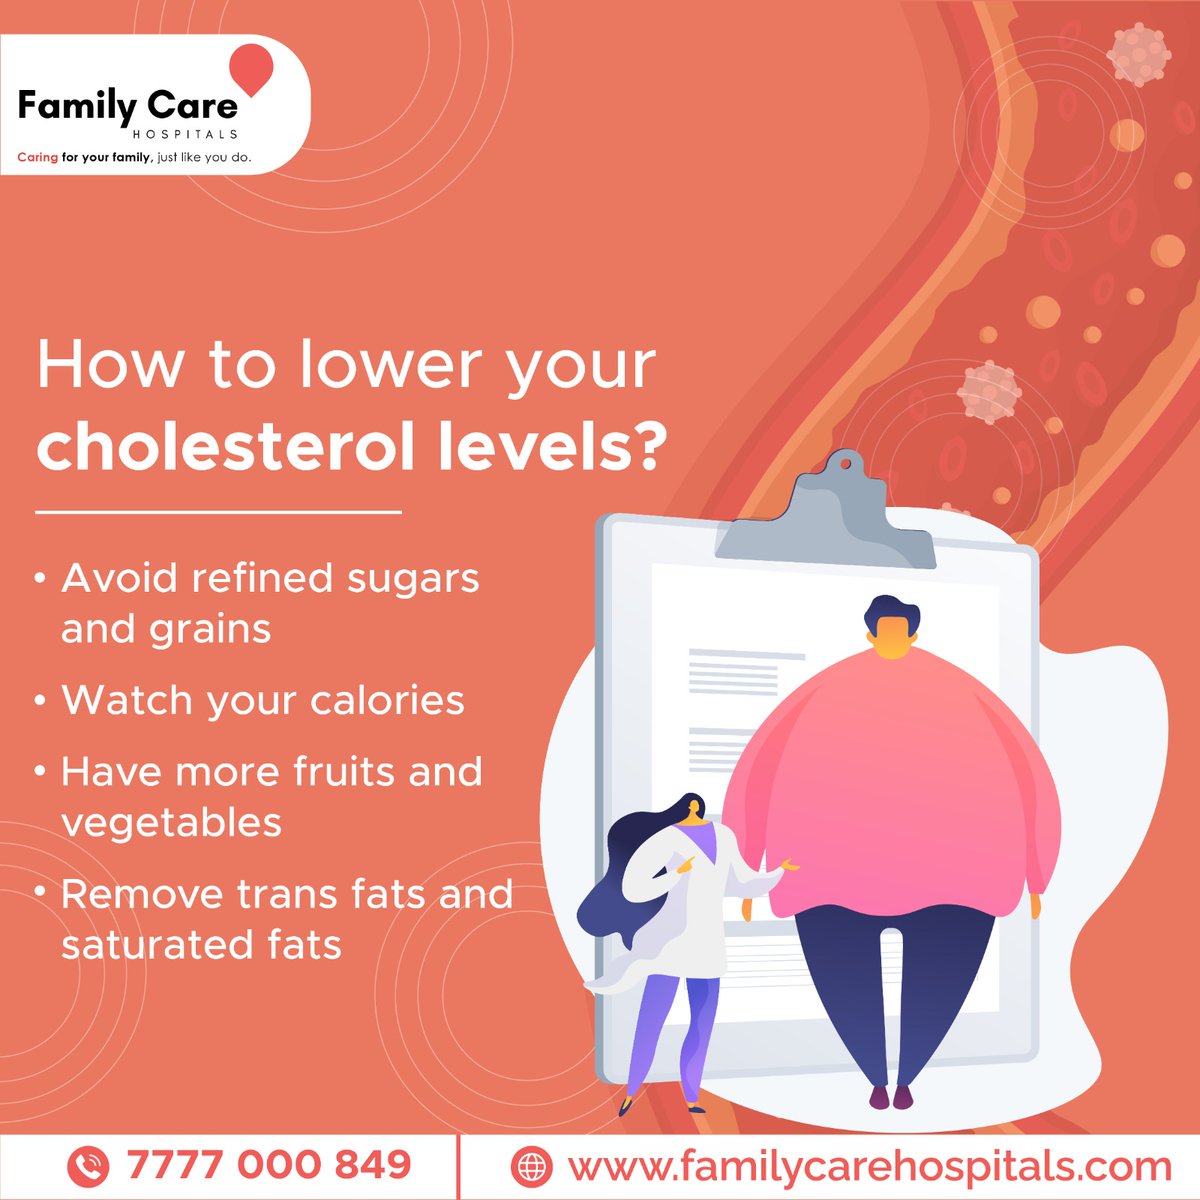 Medical study indicates that dietary modifications can help lower both LDL and  total cholesterol, although exercise alone has little effect on either.

#familycarehospitals #LowerCholesterol #CholesterolControl #HeartHealthy #HealthyEating #HealthyLiving #DietaryChanges
#LowFat